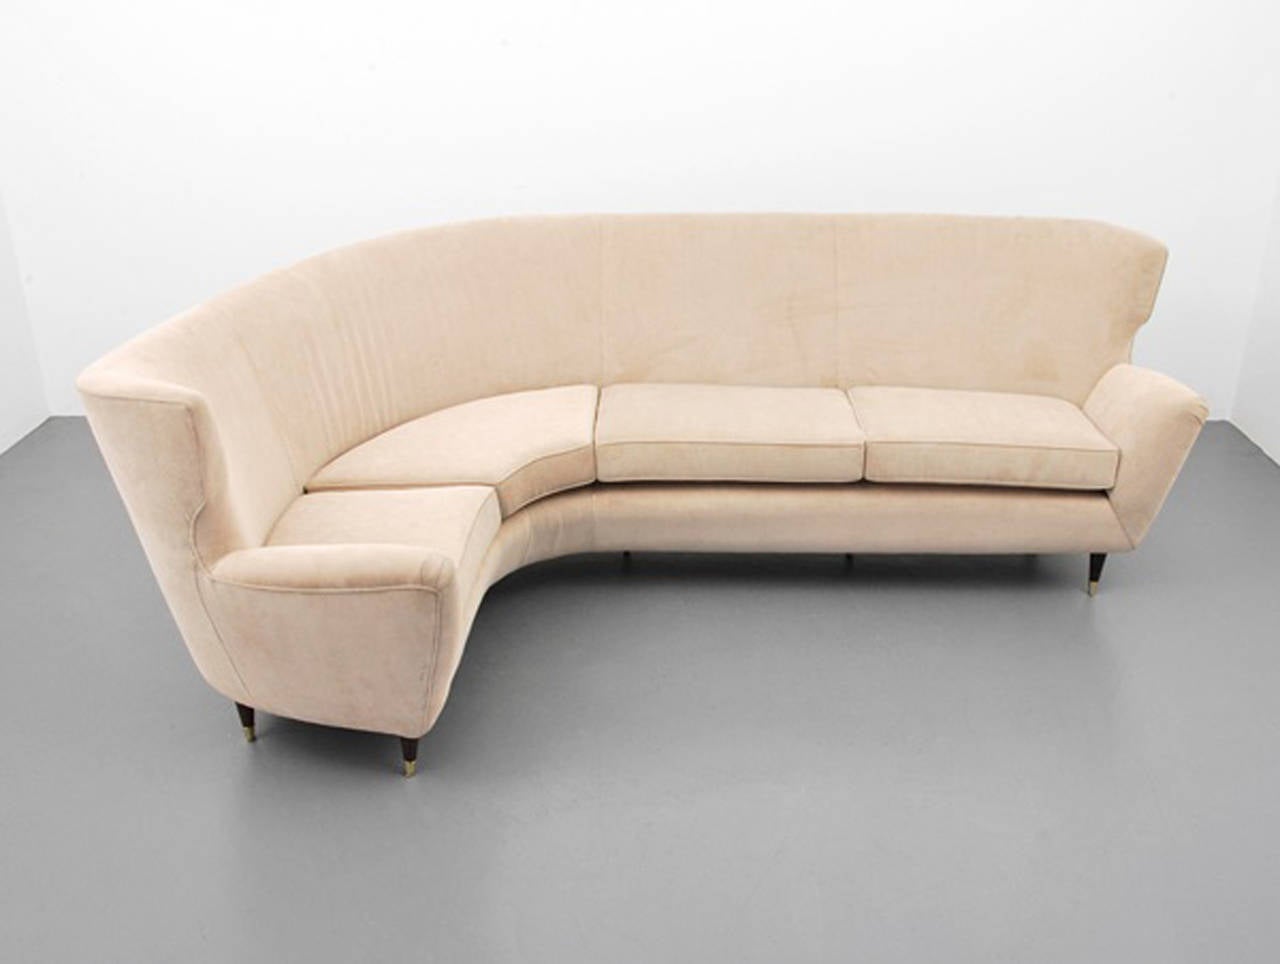 An upholstered sofa with mahogany legs and brass caps attributed to Paolo Buffa, Italian circa 1940's